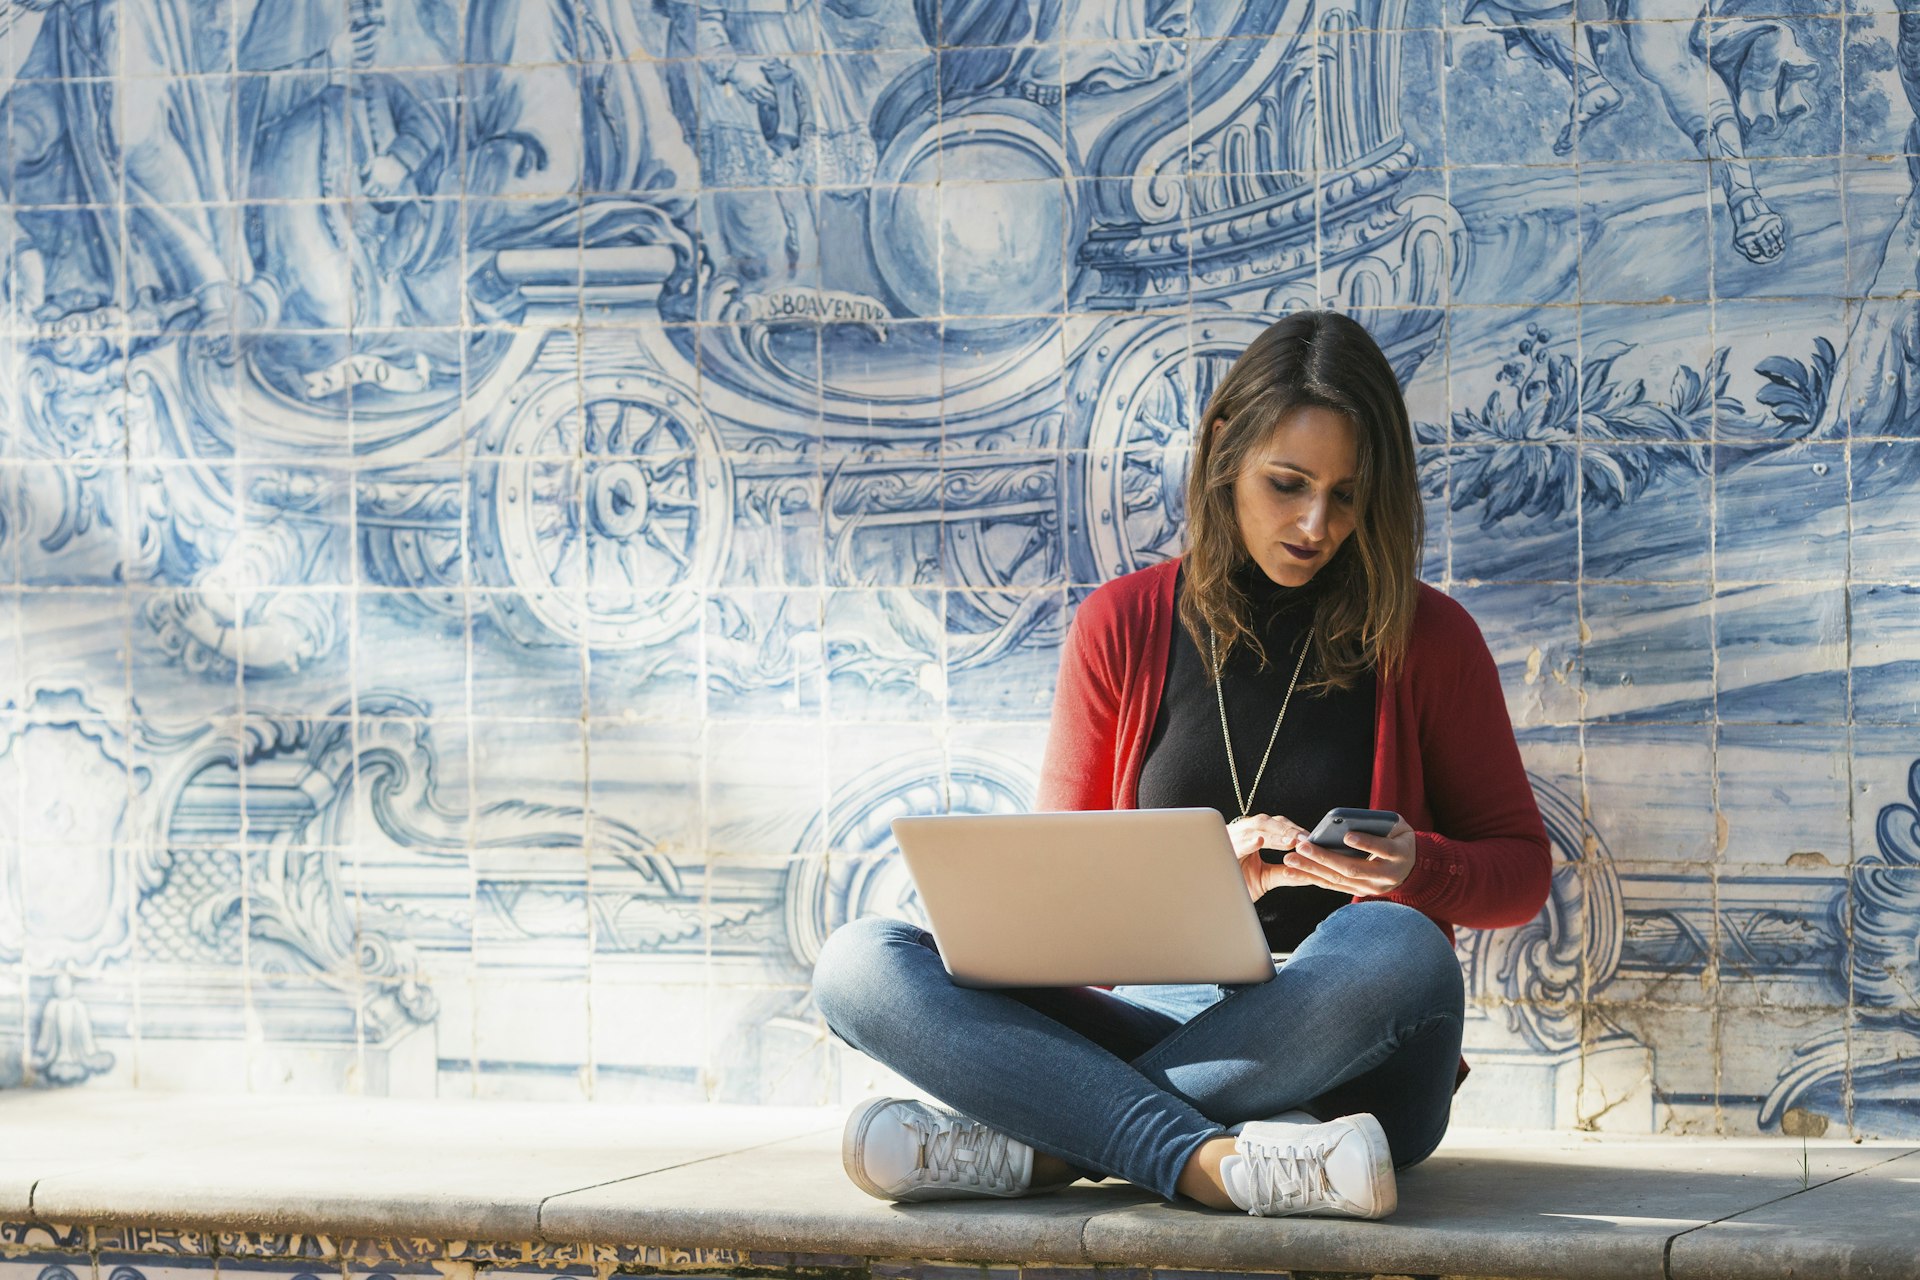 A woman sits cross-legged working on a laptop in front of a blue-tiled wall with traditional designs